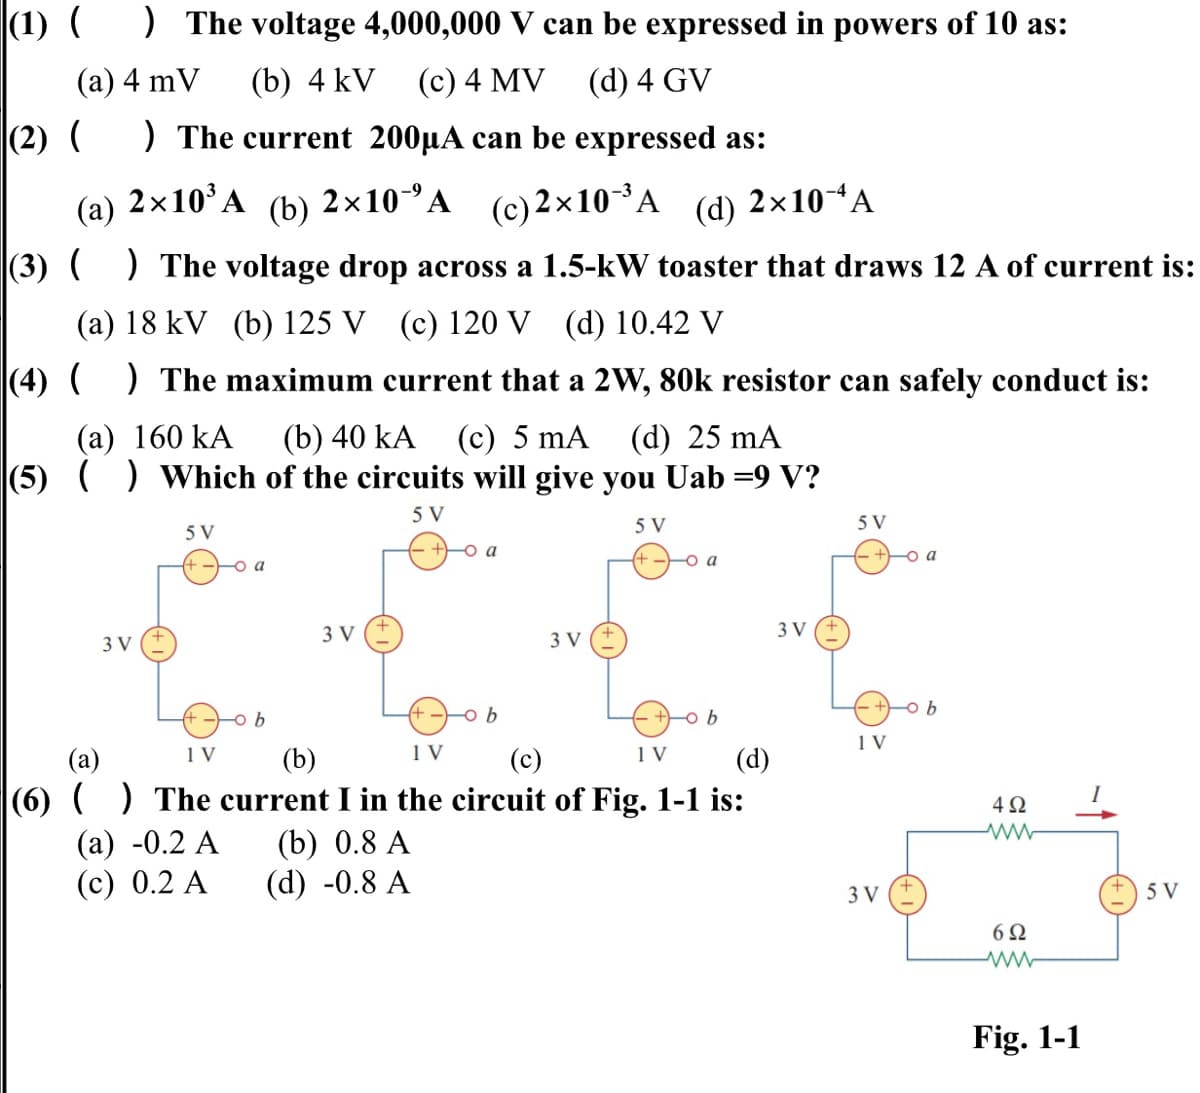 |(1) (
) The voltage 4,000,000 V can be expressed in powers of 10 as:
(c) 4 MV (d) 4 GV
(а) 4 mV
(b) 4 kV
(2) (
) The current 200µA can be expressed as:
(а)
2x10'A
(b) 2х10°А (с) 2 х10 *А
(c) 2×10A
(d)
2×10A
|(3) ( ) The voltage drop across a 1.5-kW toaster that draws 12 A of current is:
(a) 18 kV (b) 125 V (c) 120 V (d) 10.42 V
|(4) ( ) The maximum current that a 2W, 80k resistor can safely conduct is:
(b) 40 kA
|(5) () Which of the circuits will give you Uab =9 V?
(а) 160 kA
(c) 5 mA
(d) 25 mA
5 V
5 V
5 V
5 V
a
a
-o a
3 V
3 V
3 V
3 V
-o b
-o b
-o b
1 V
1 V
(b)
1 V
1V
(a)
|(6) () The current I in the circuit of Fig. 1-1 is:
(а) -0.2 А
(с) 0.2 А
(c)
(d)
(b) 0.8 A
(d) -0.8 A
3 V
5 V
6Ω
Fig. 1-1
